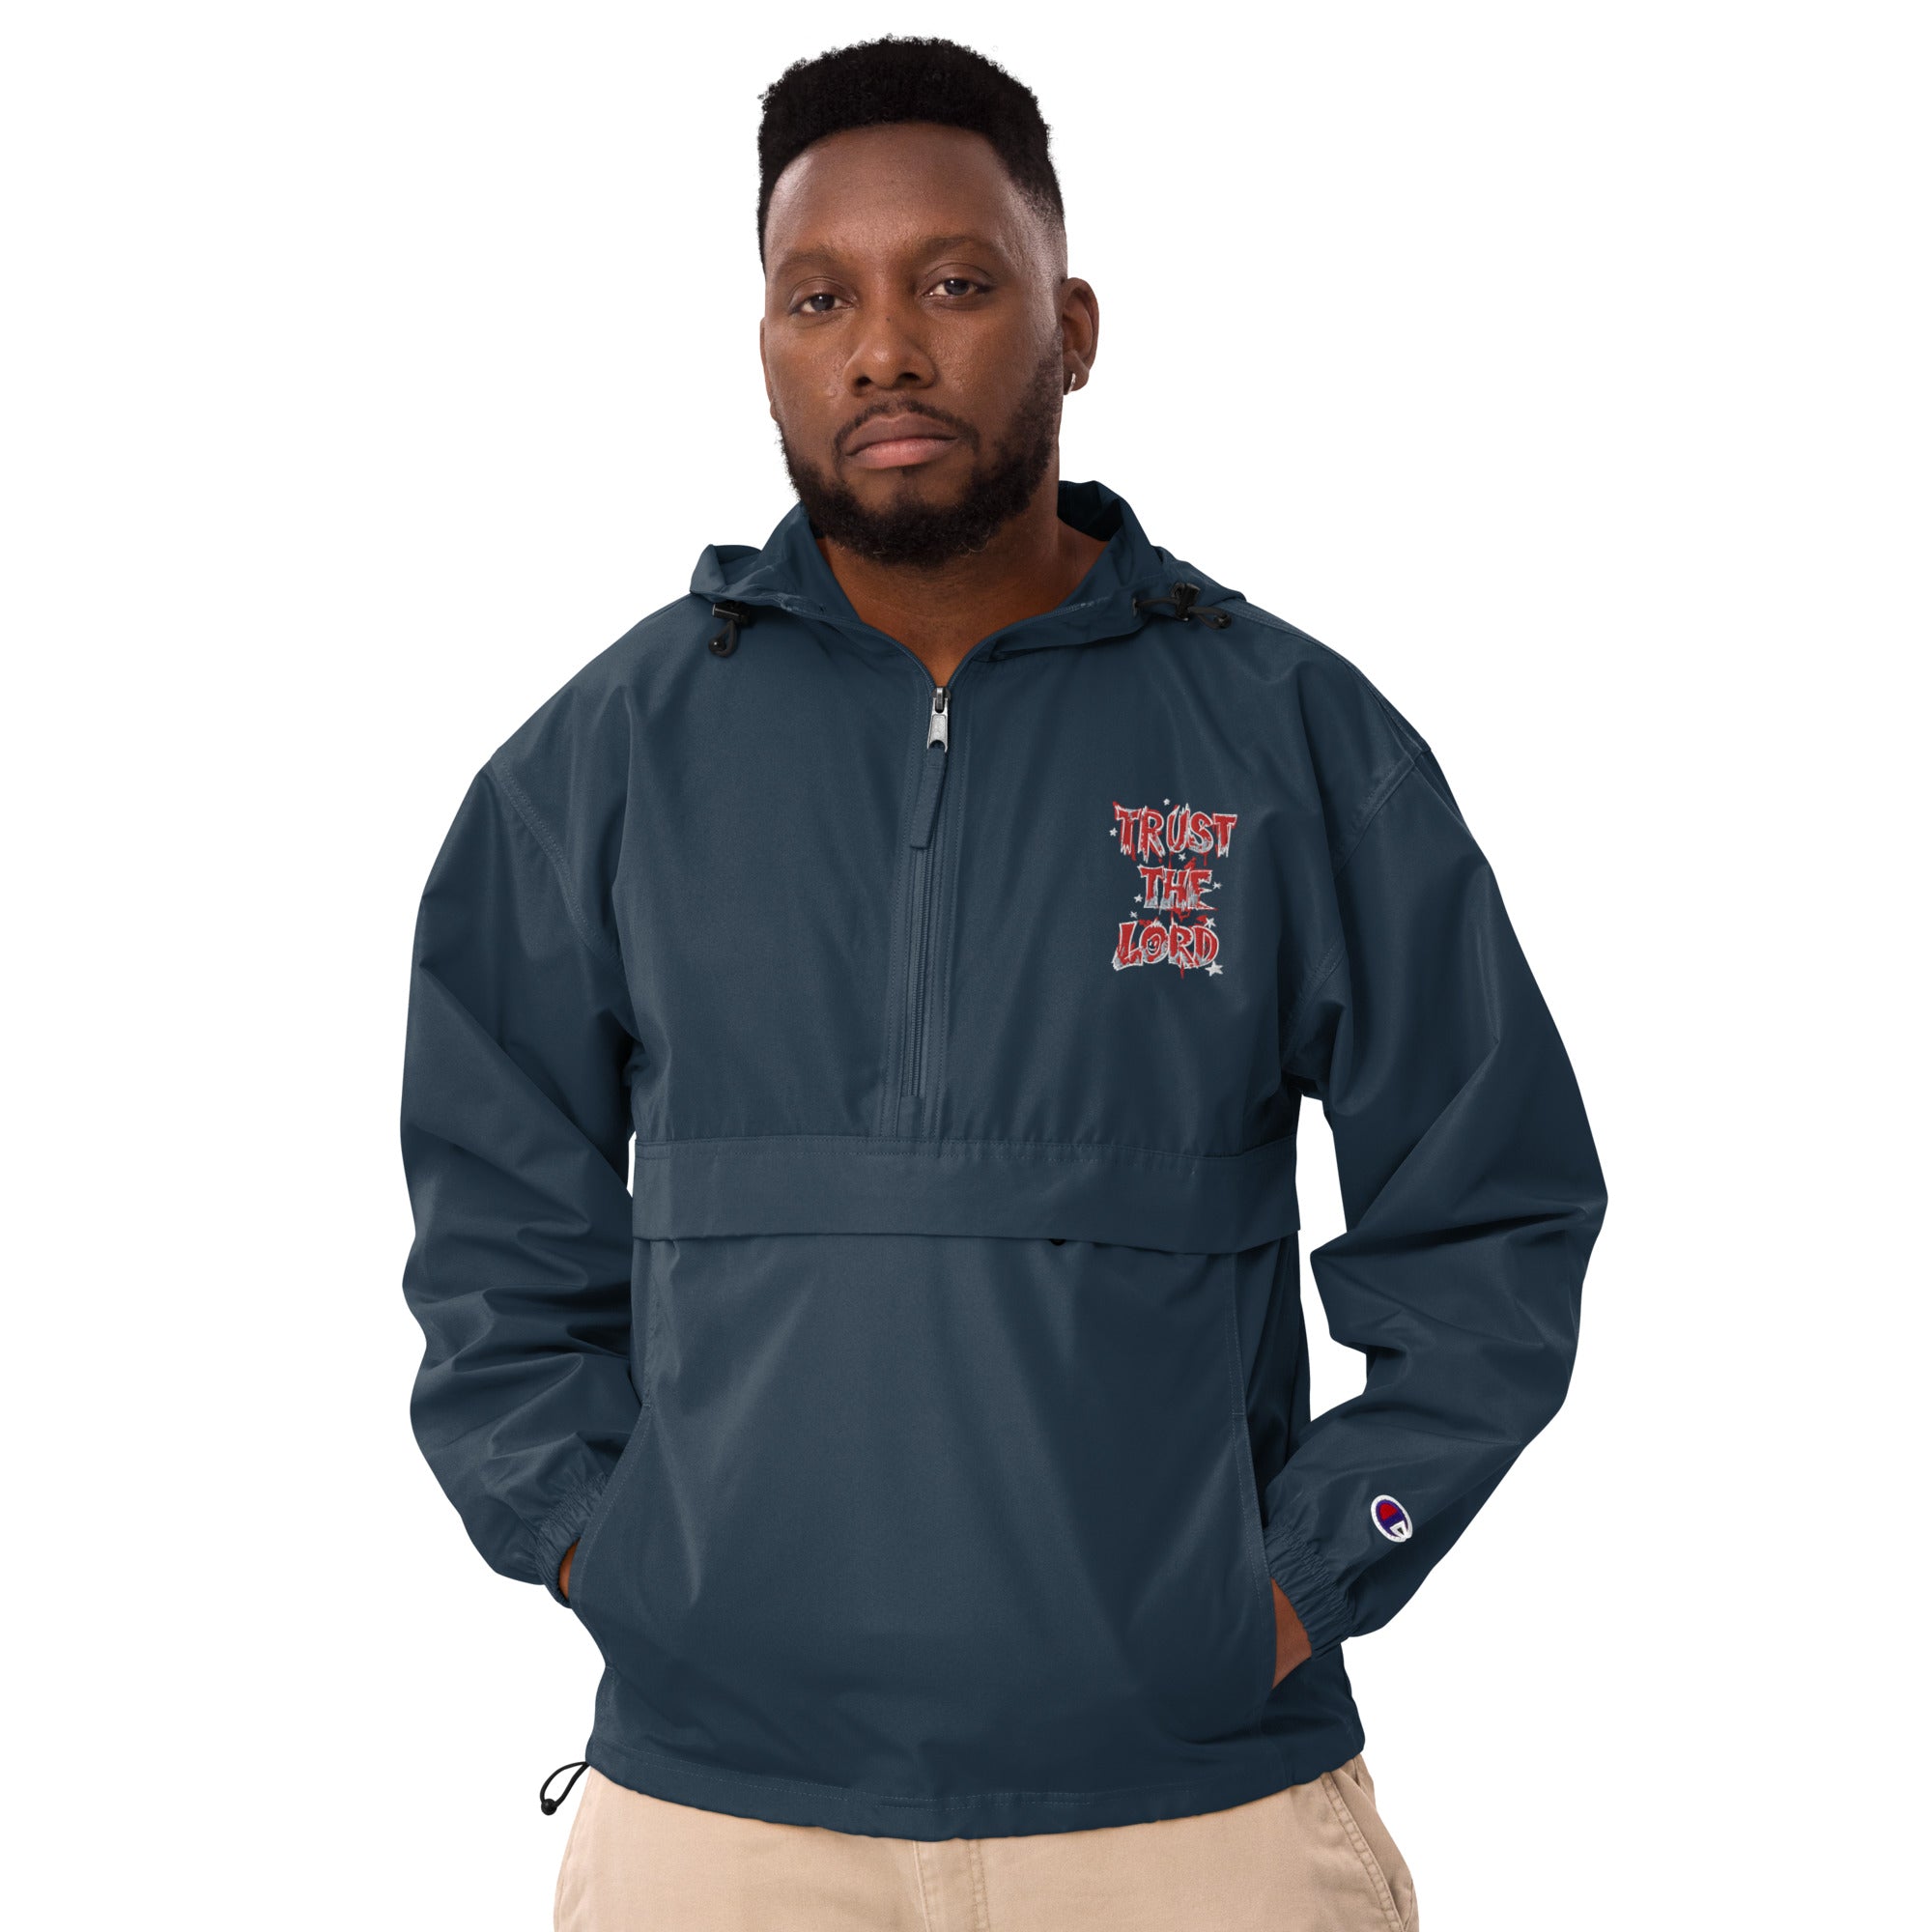 Trust the LORD Embroidered Champion Packable Jacket